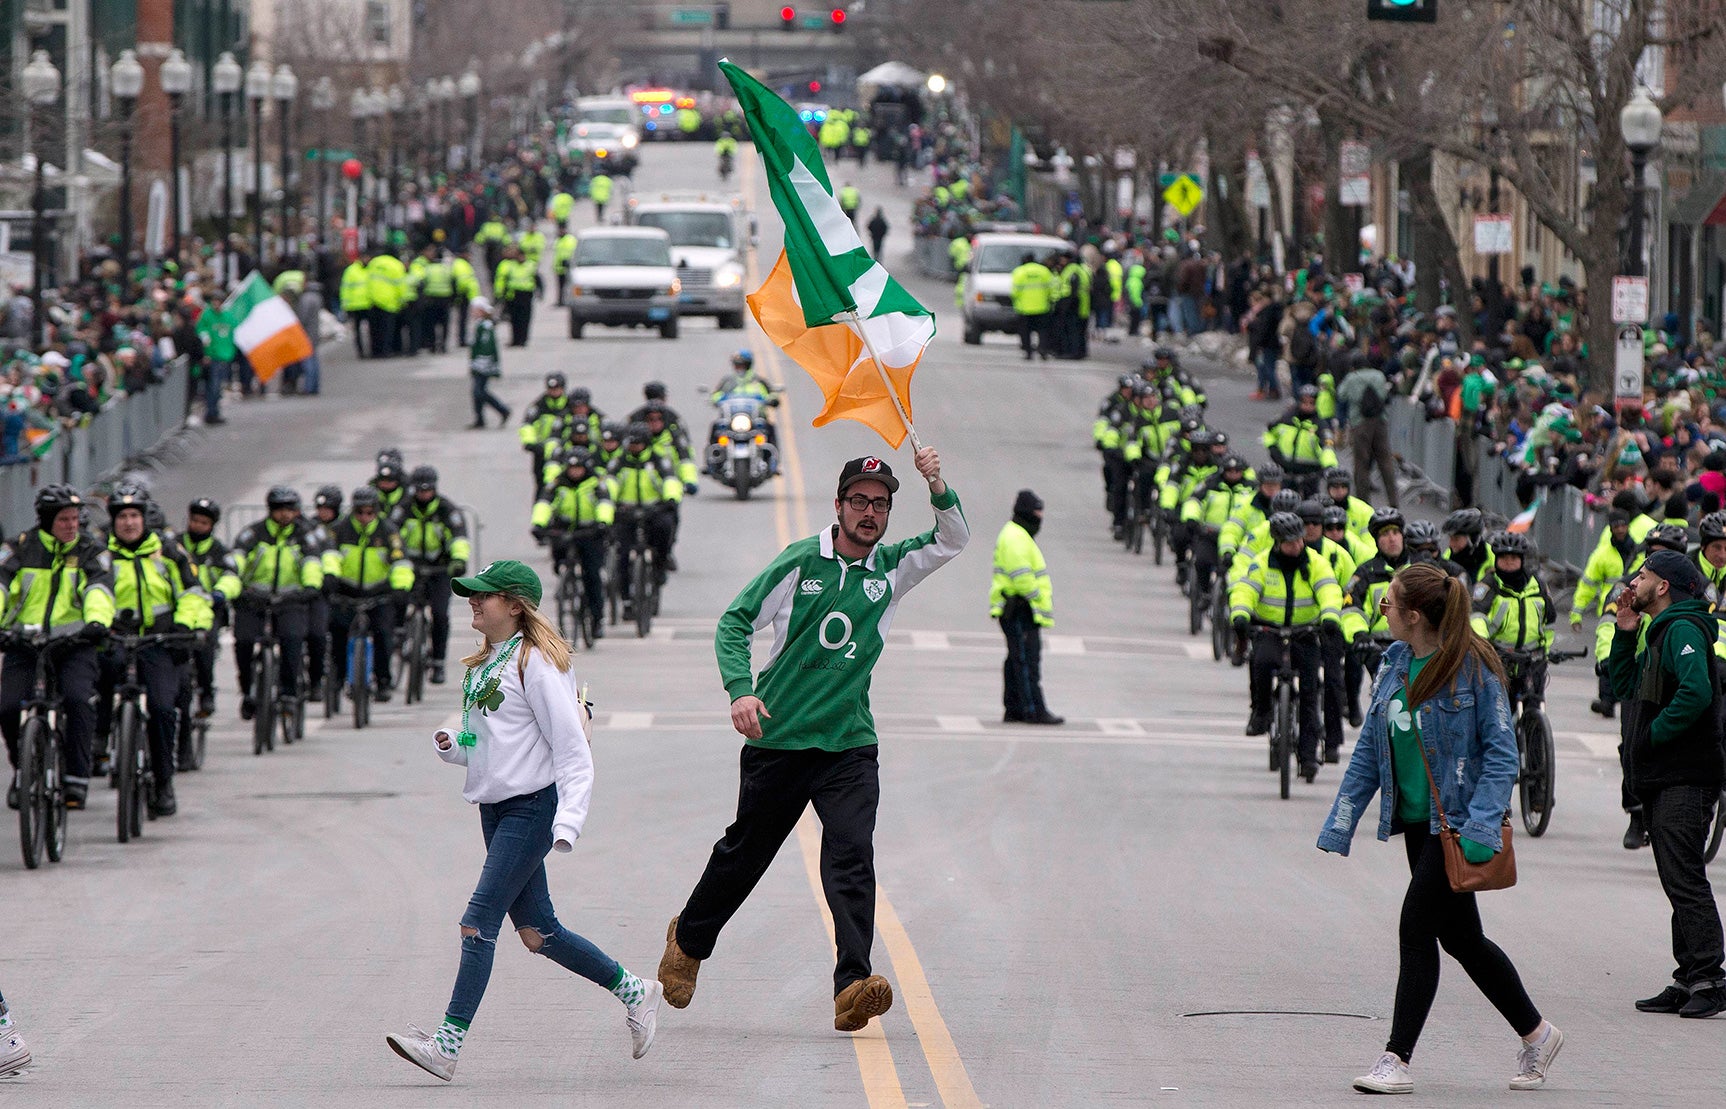 Thousands of revelers take over Southie for St. Patrick's Day parade